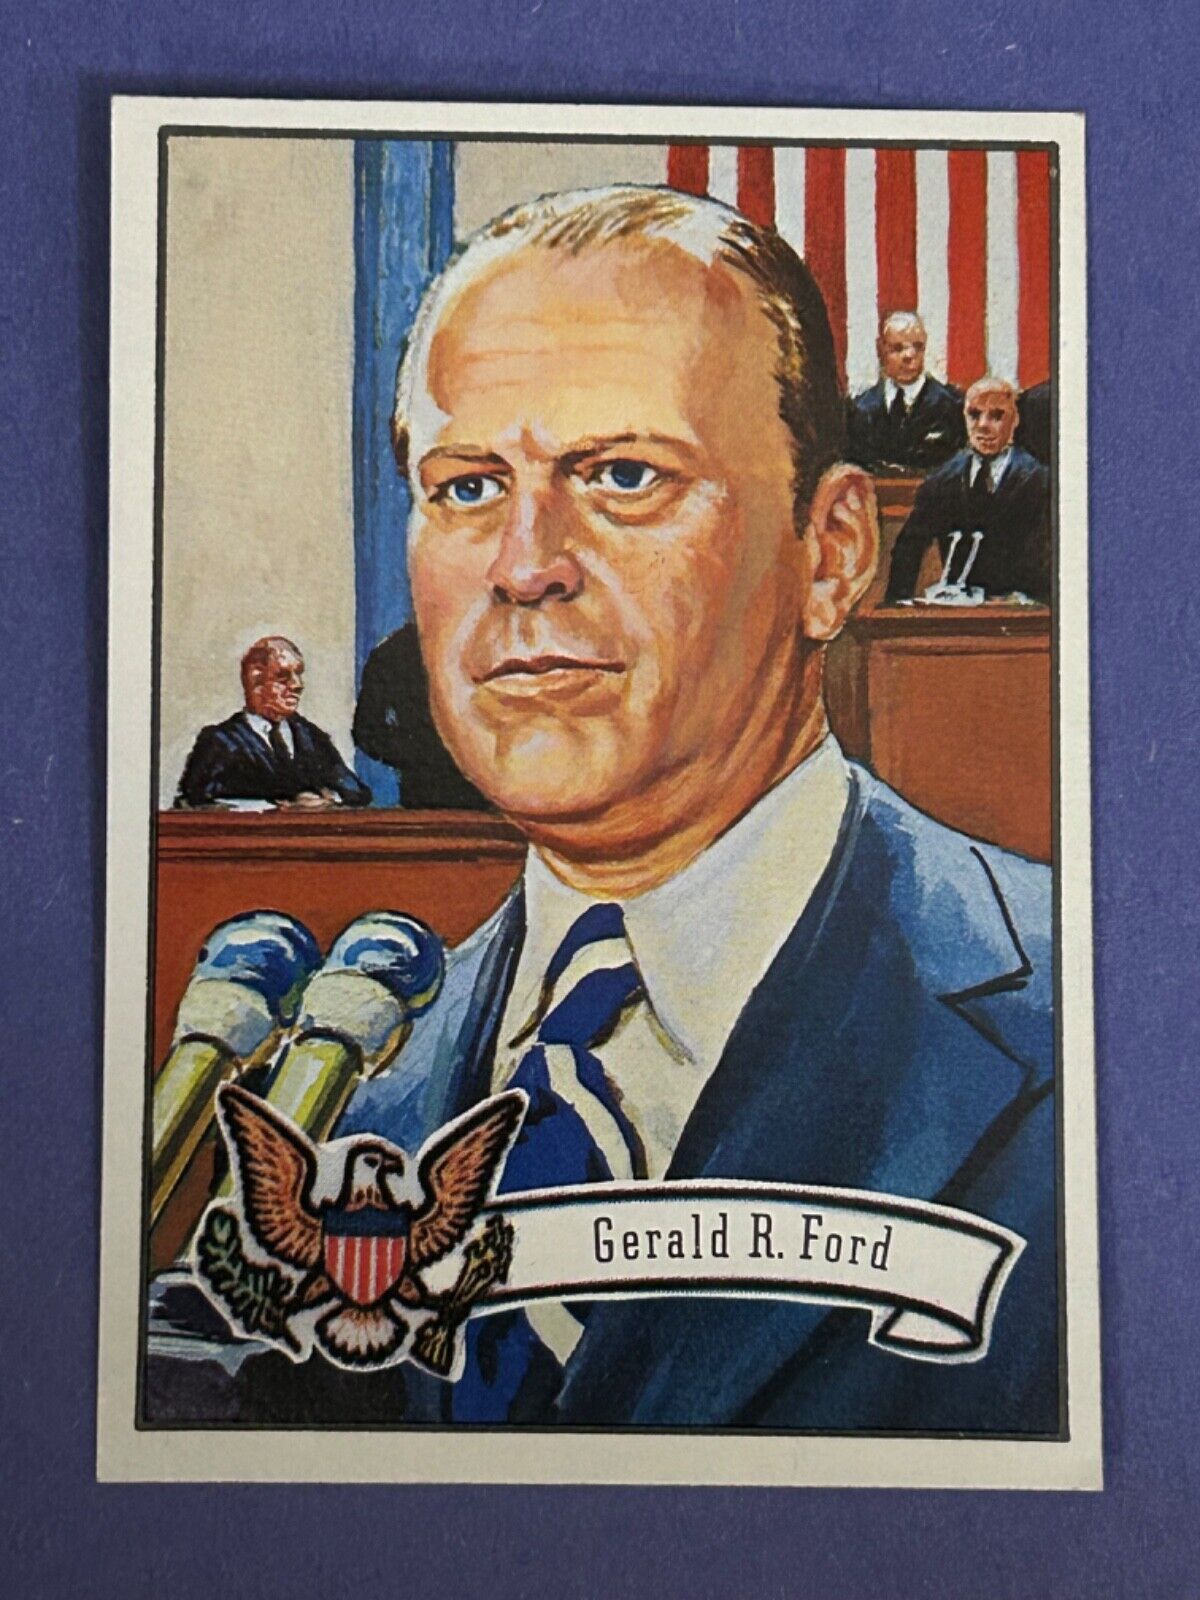 1972 1976 TOPPS U.S. PRESIDENT GERALD FORD #37 RC ROOKIE scarce